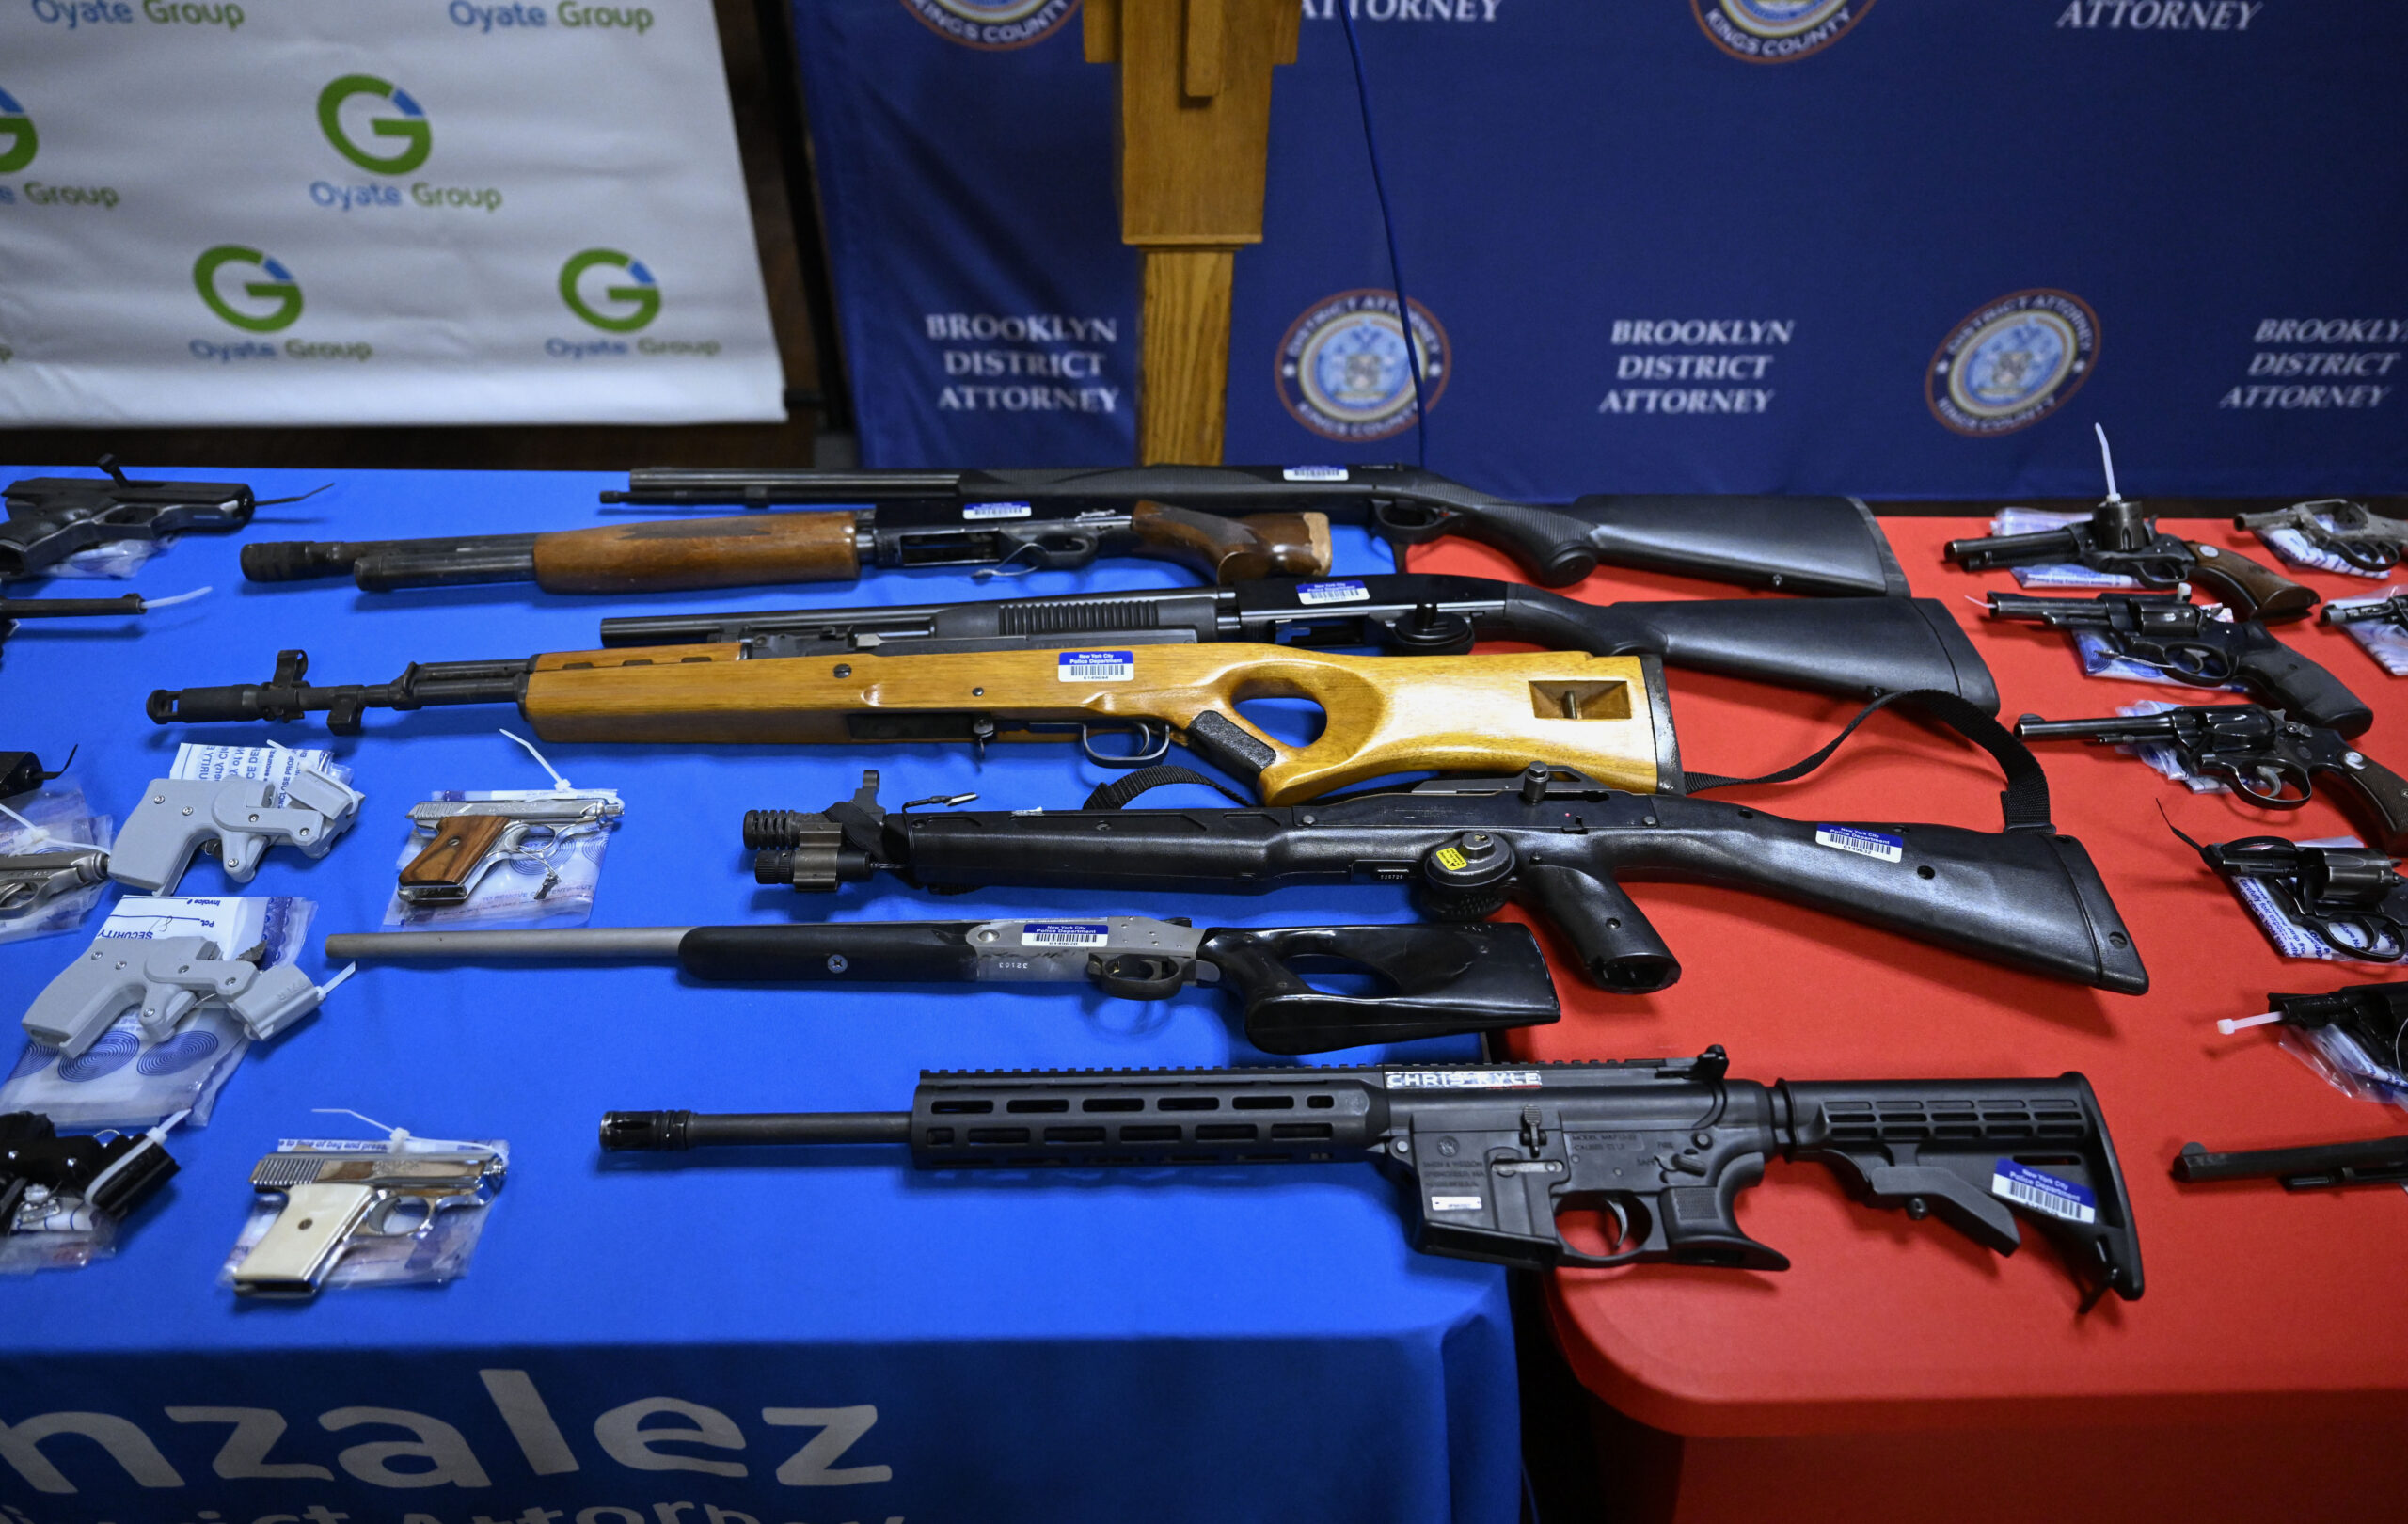 Guns For Gift Cards: New Yorkers Surrendered 3,000 Firearms To State Gov. For Cash